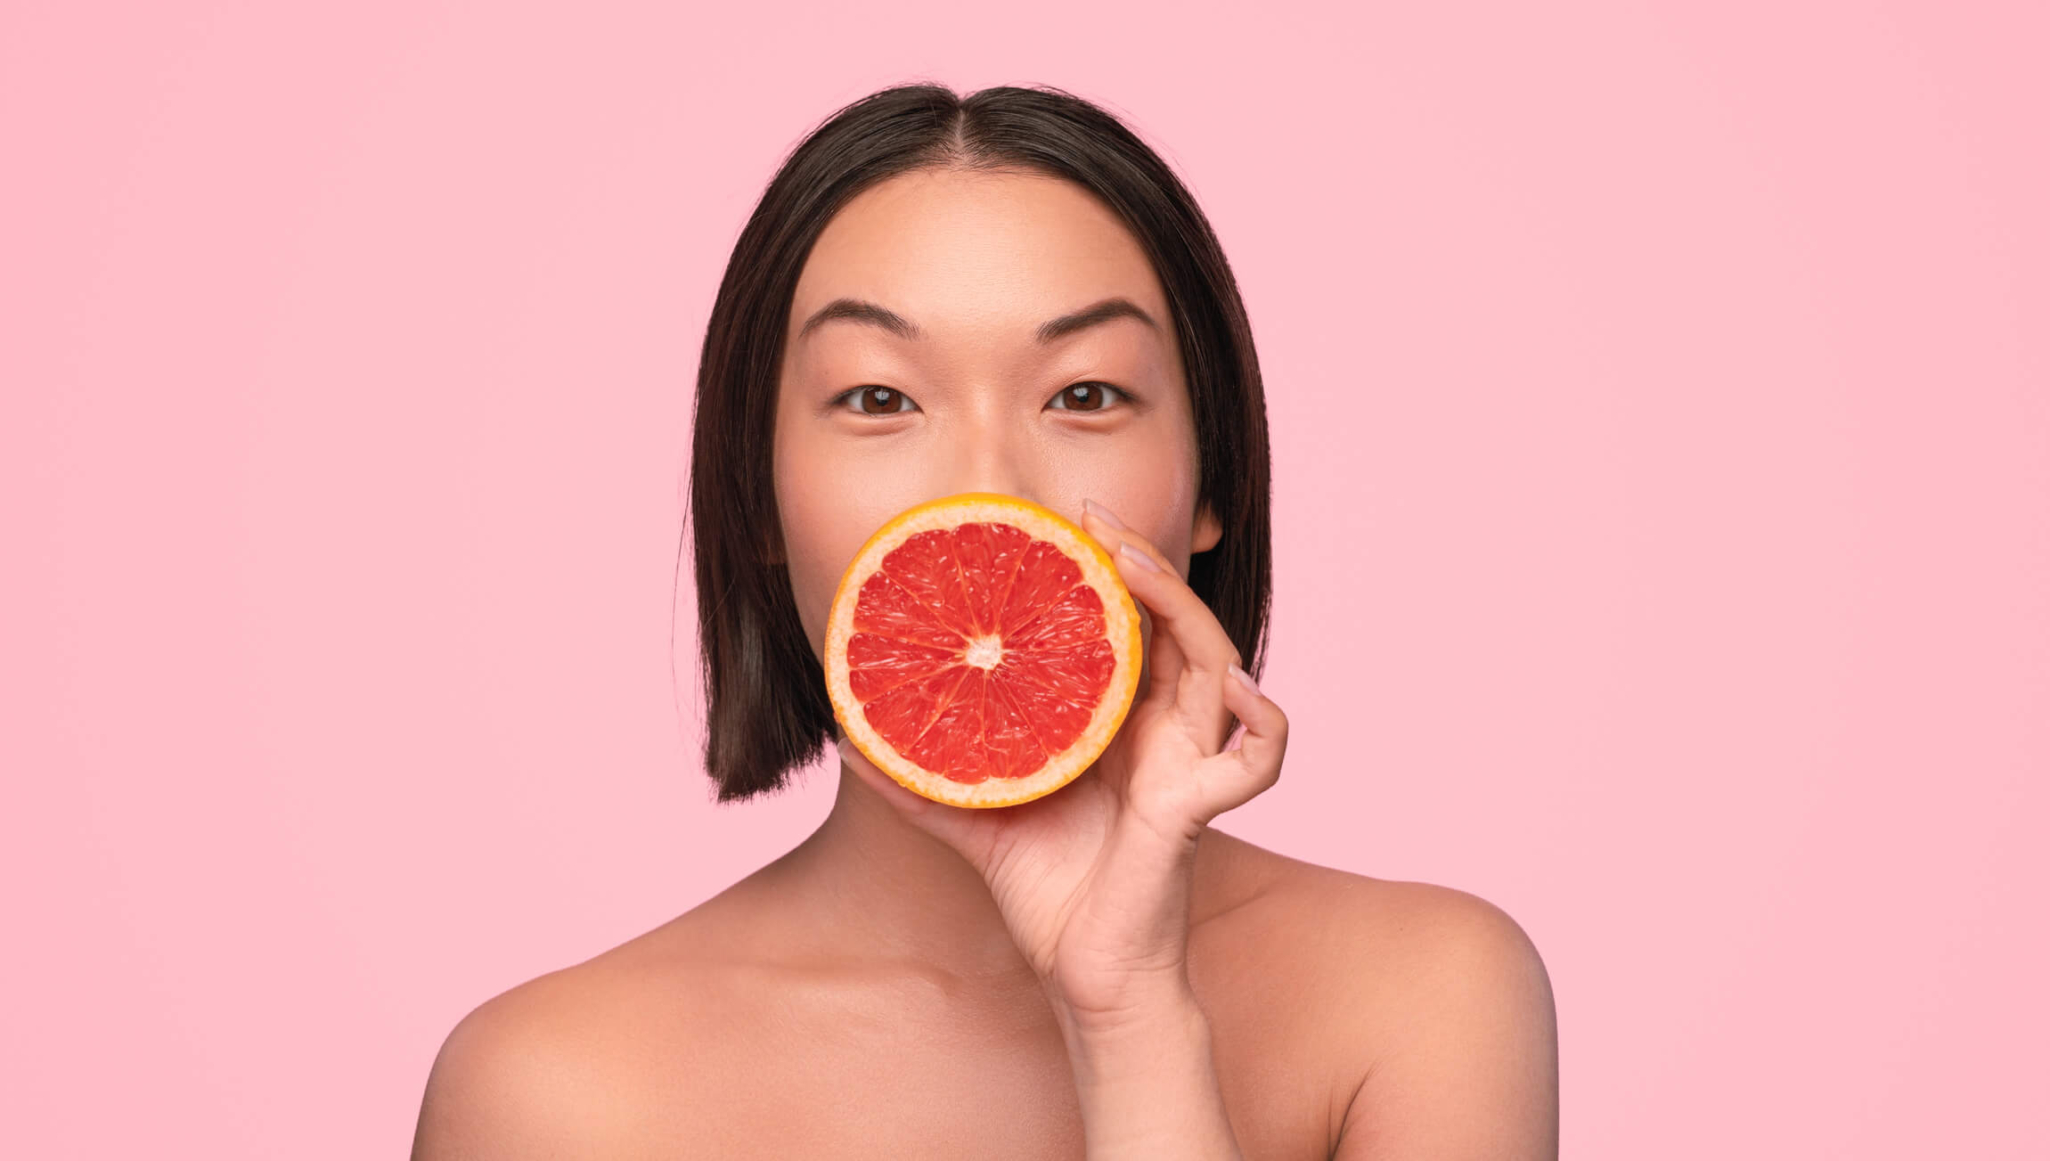 Can You Use Vitamin C Serum with Red Light Therapy?